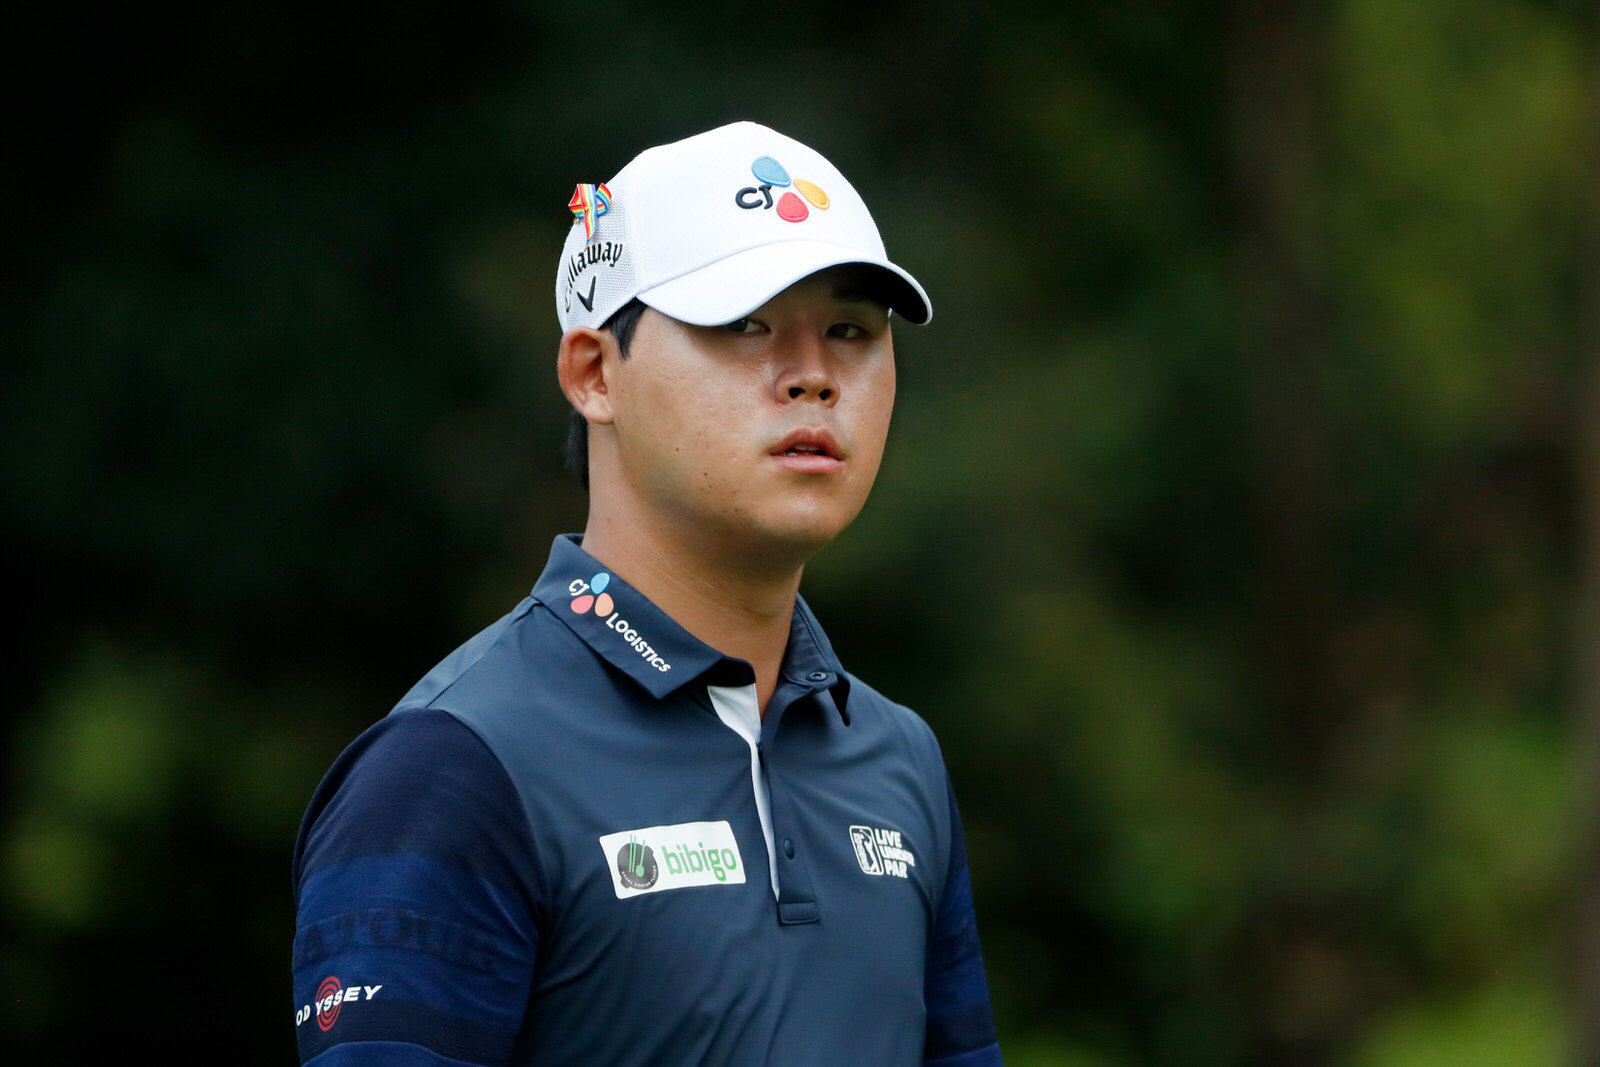  GREENSBORO, NORTH CAROLINA - AUGUST 14: Si Woo Kim of South Korea looks on during the second round of the Wyndham Championship at  Sedgefield Country Club on August 14, 2020 in Greensboro, North Carolina. (Photo by Chris Keane/Getty Images) 